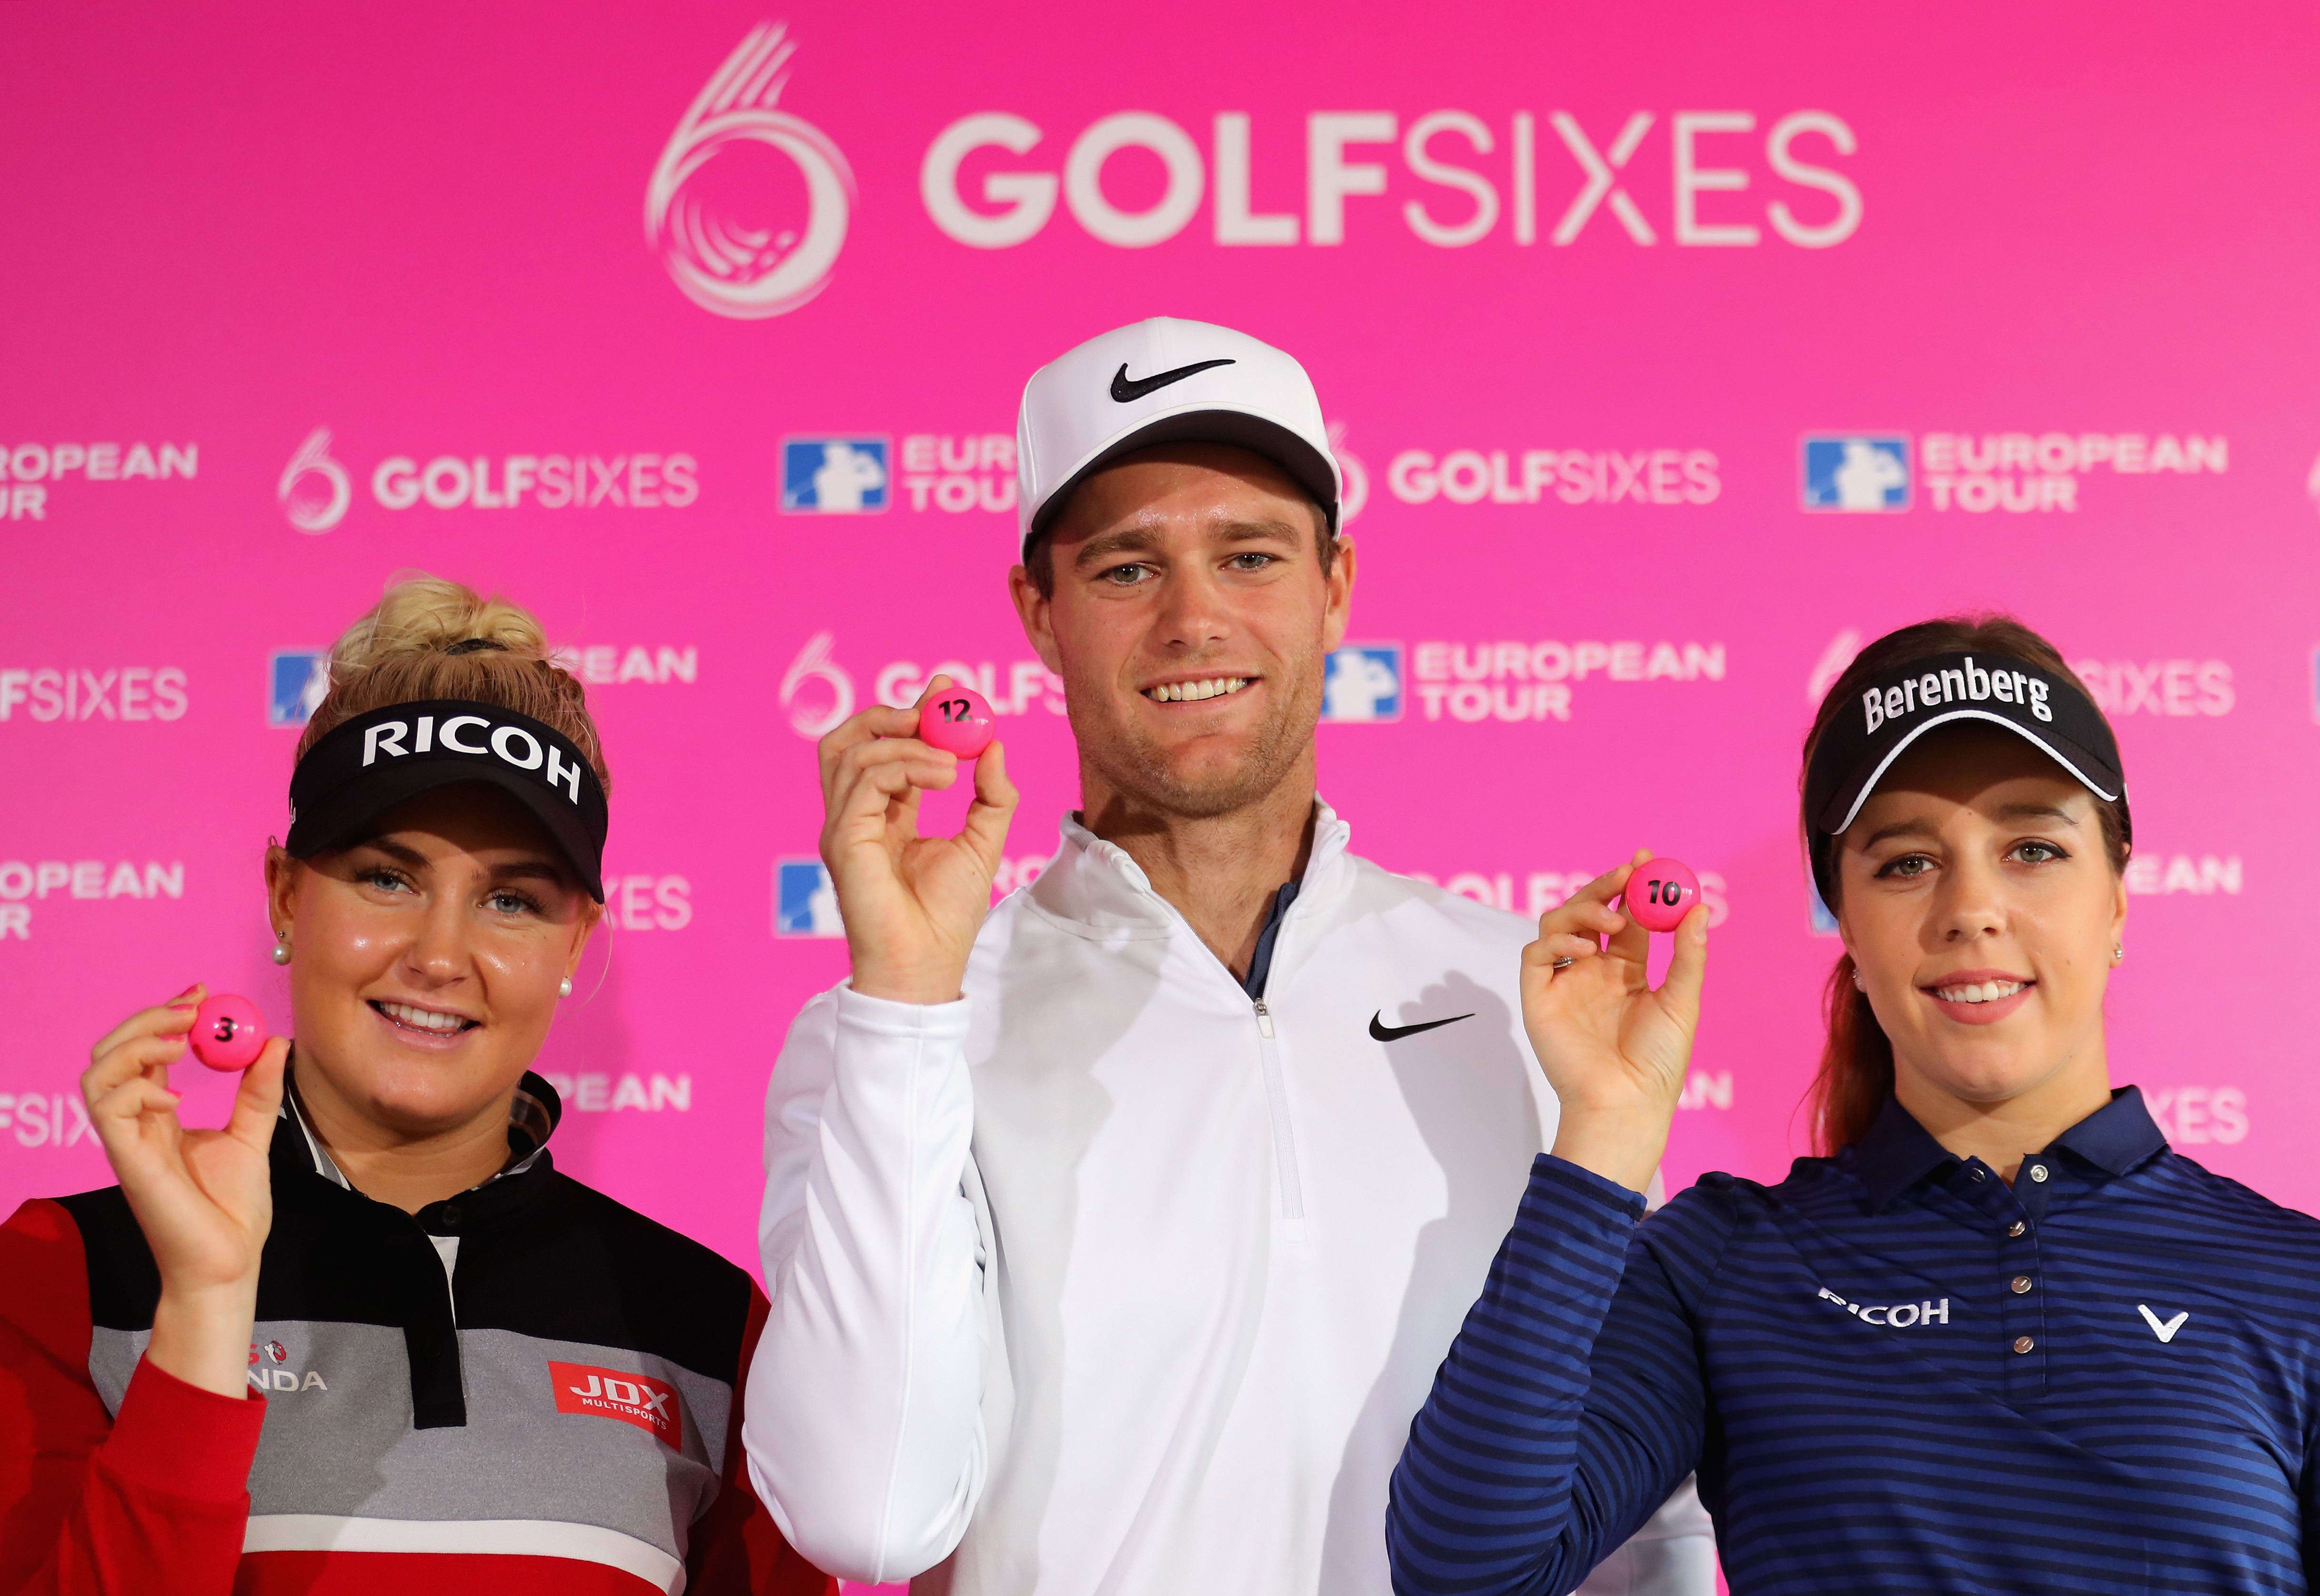 GolfSixes is back for a second year – but how does it work?